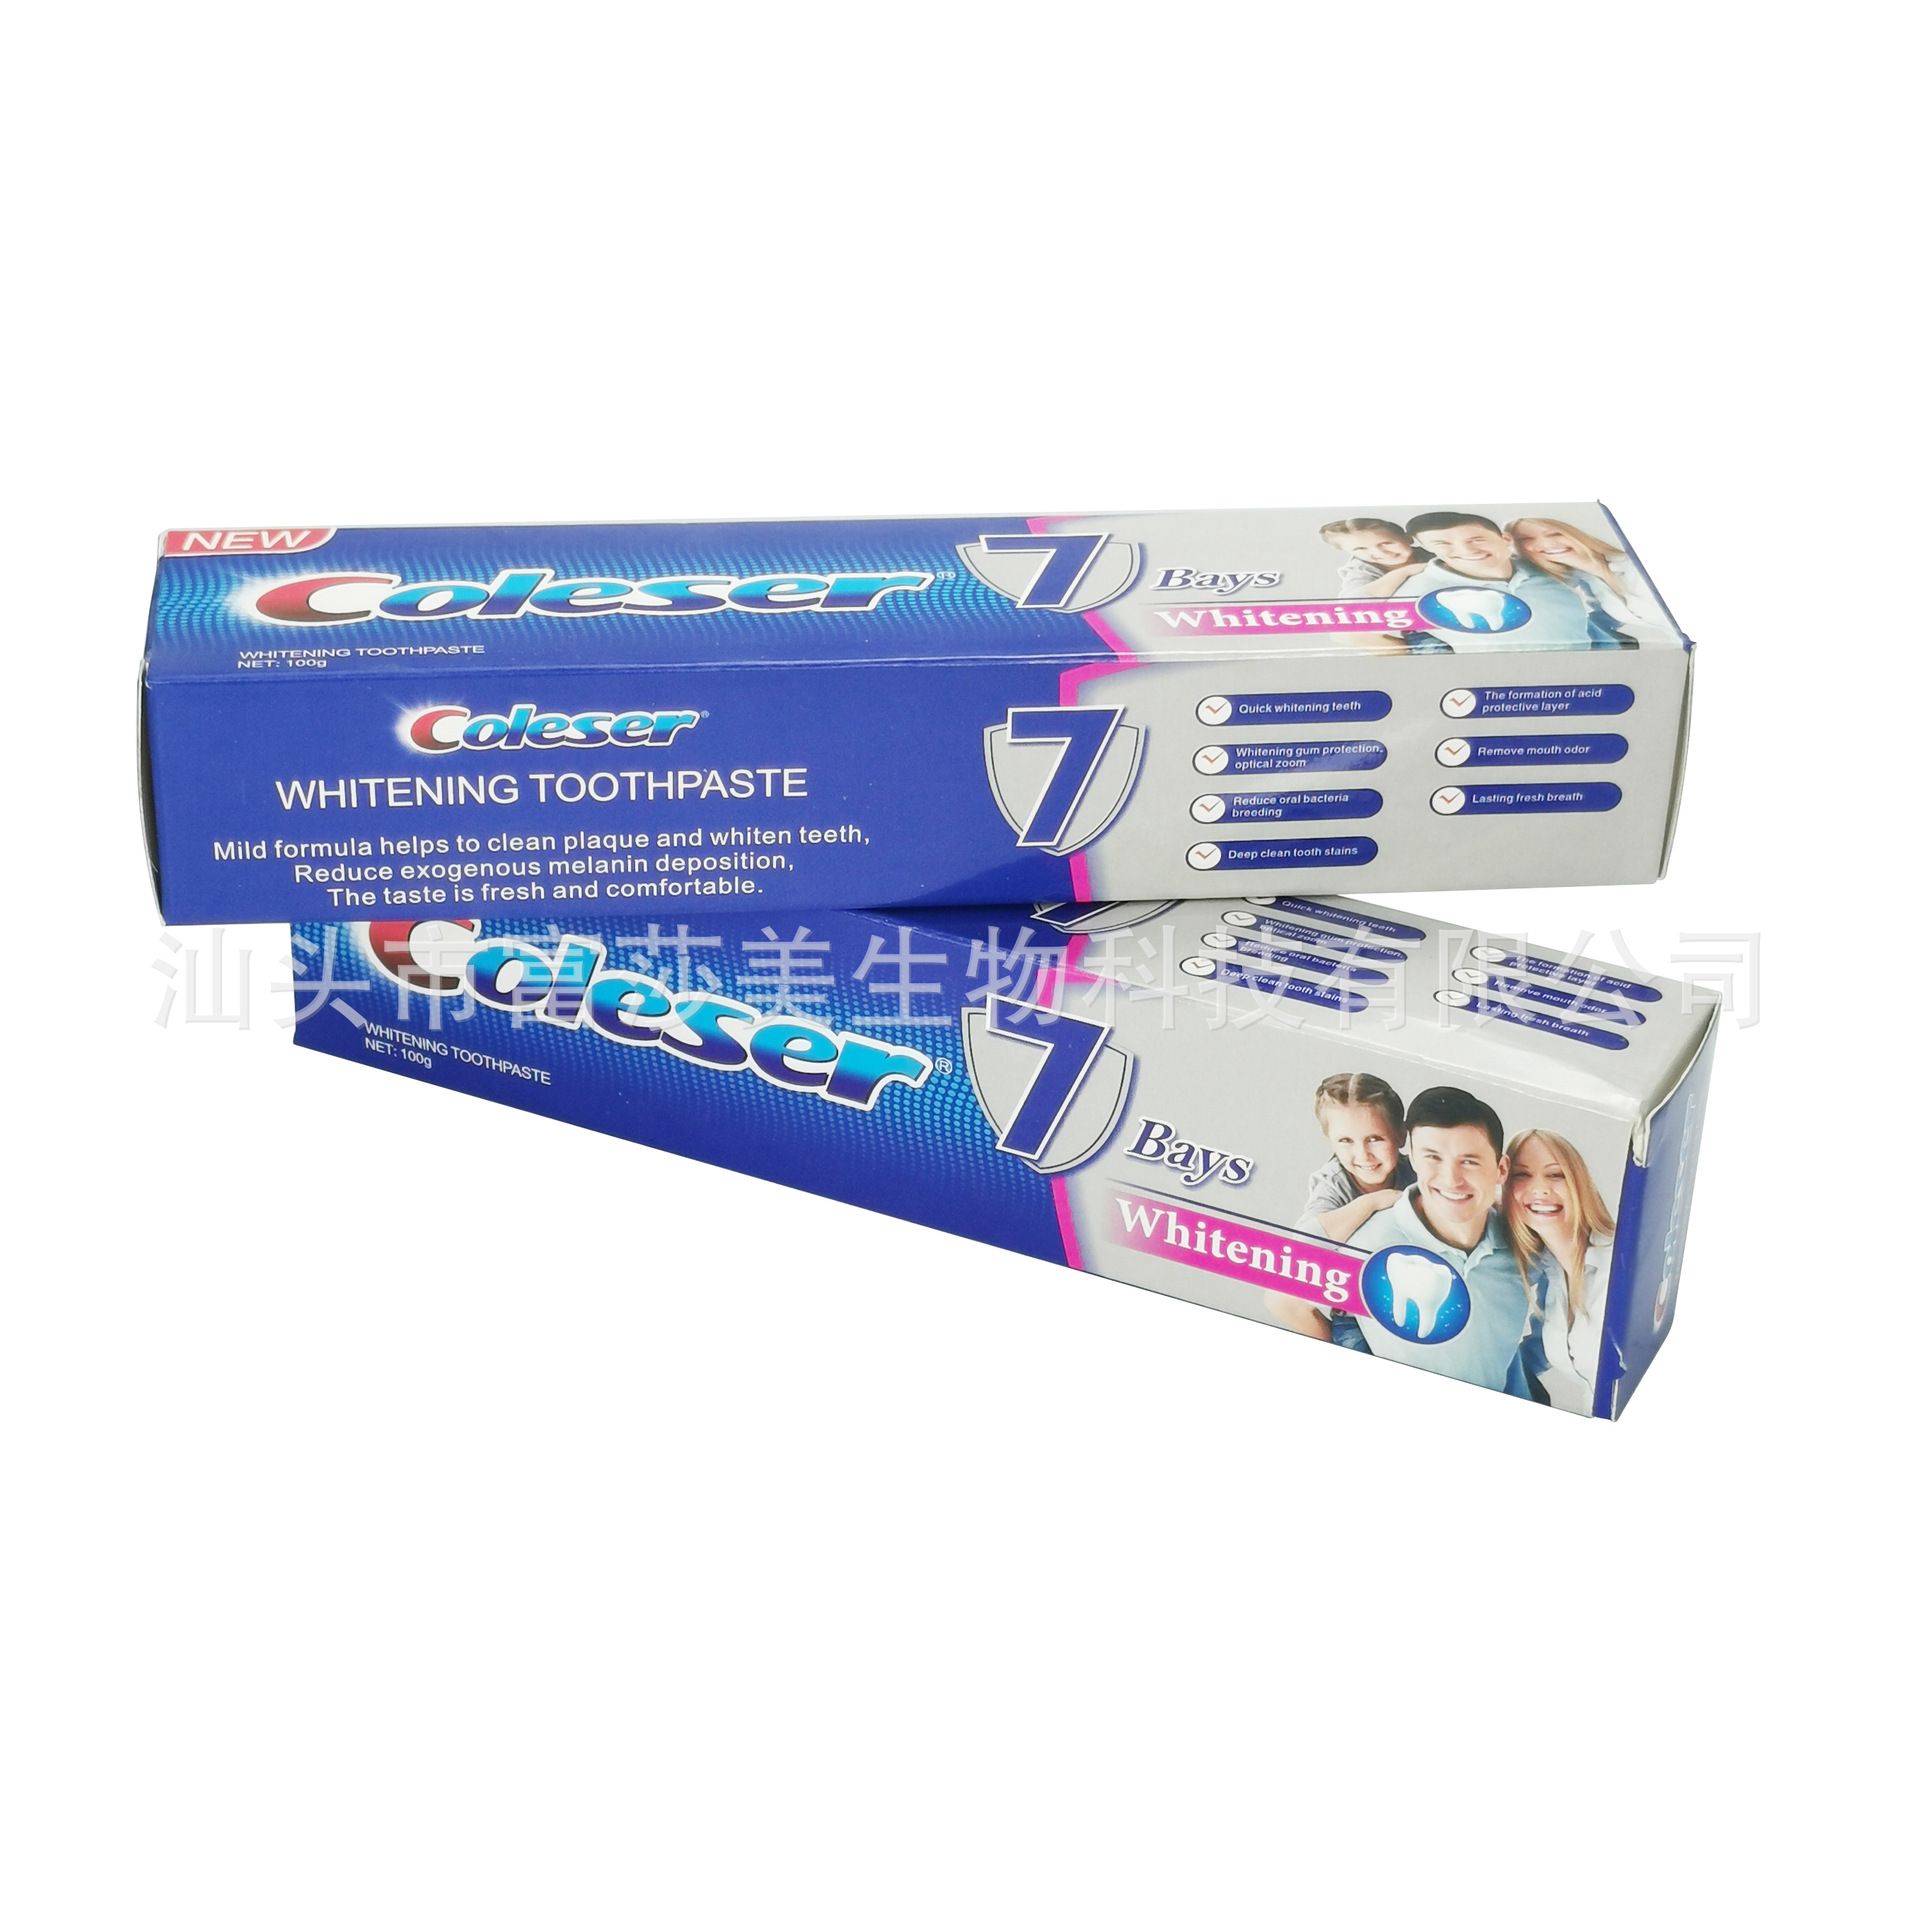 Spot Manufacturer 100G Cross-Border Foreign Trade English African Middle East Toothpaste Toothpaste Coleser